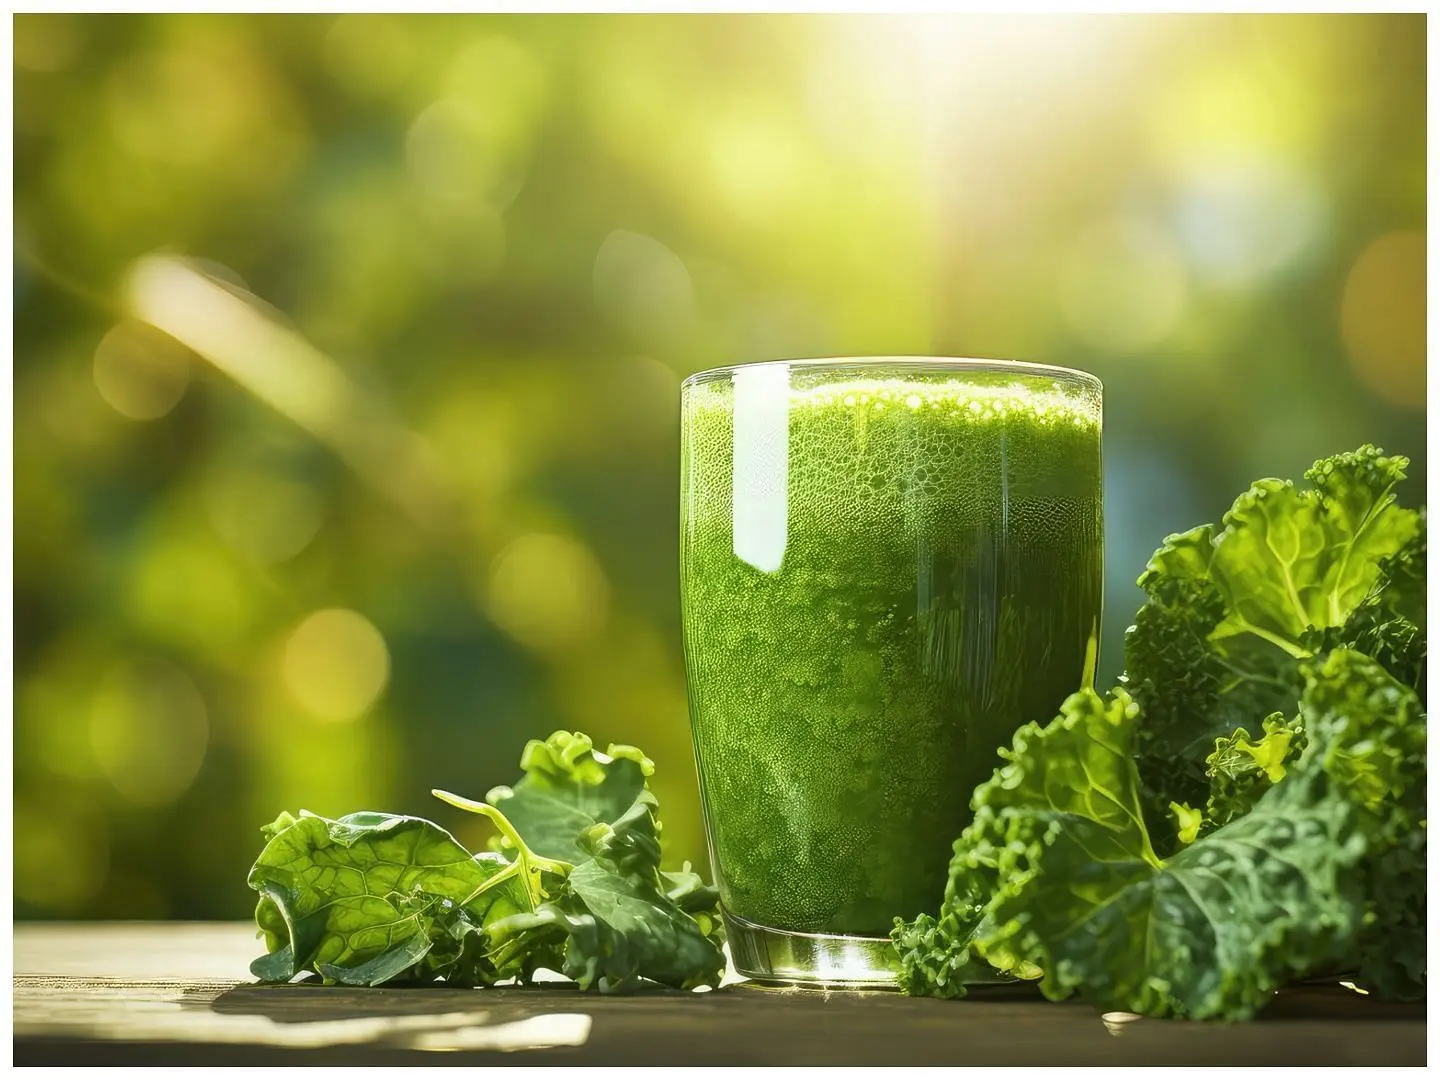 Spinach adds healthy nutrients in this smoothie (Image via Vecteezy)